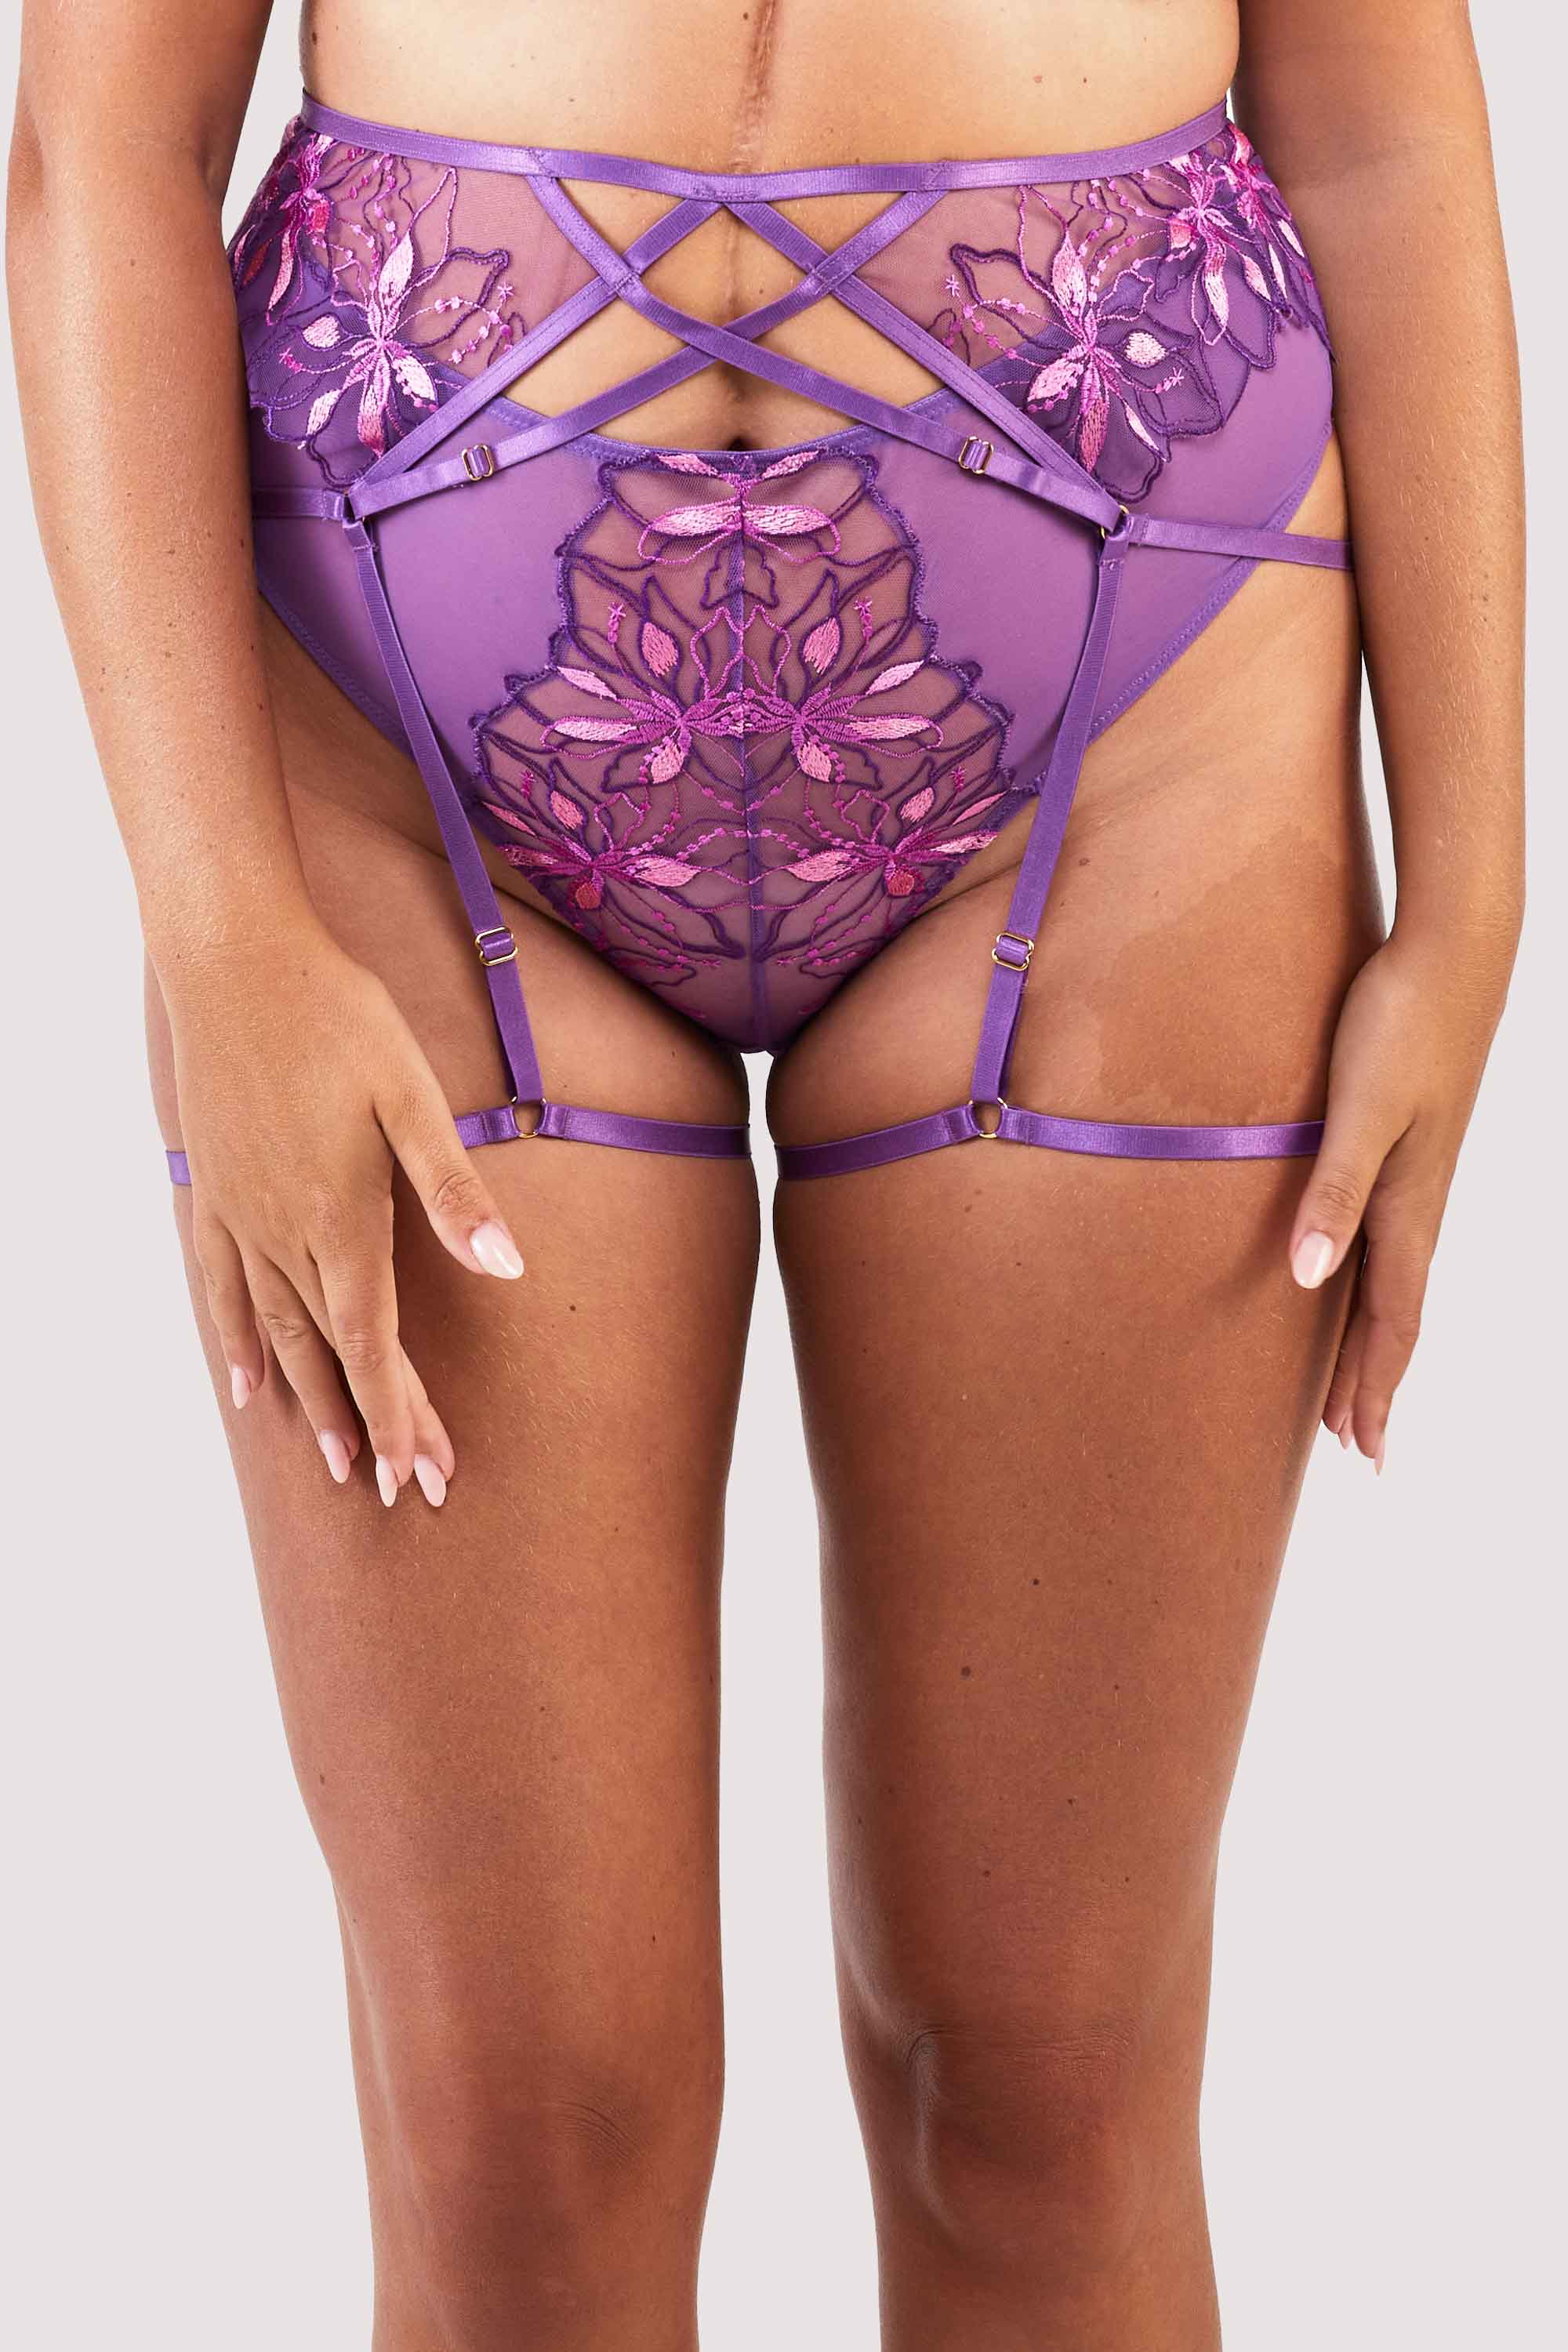 4 strap suspender with purple straps over the stomach, hips and thighs